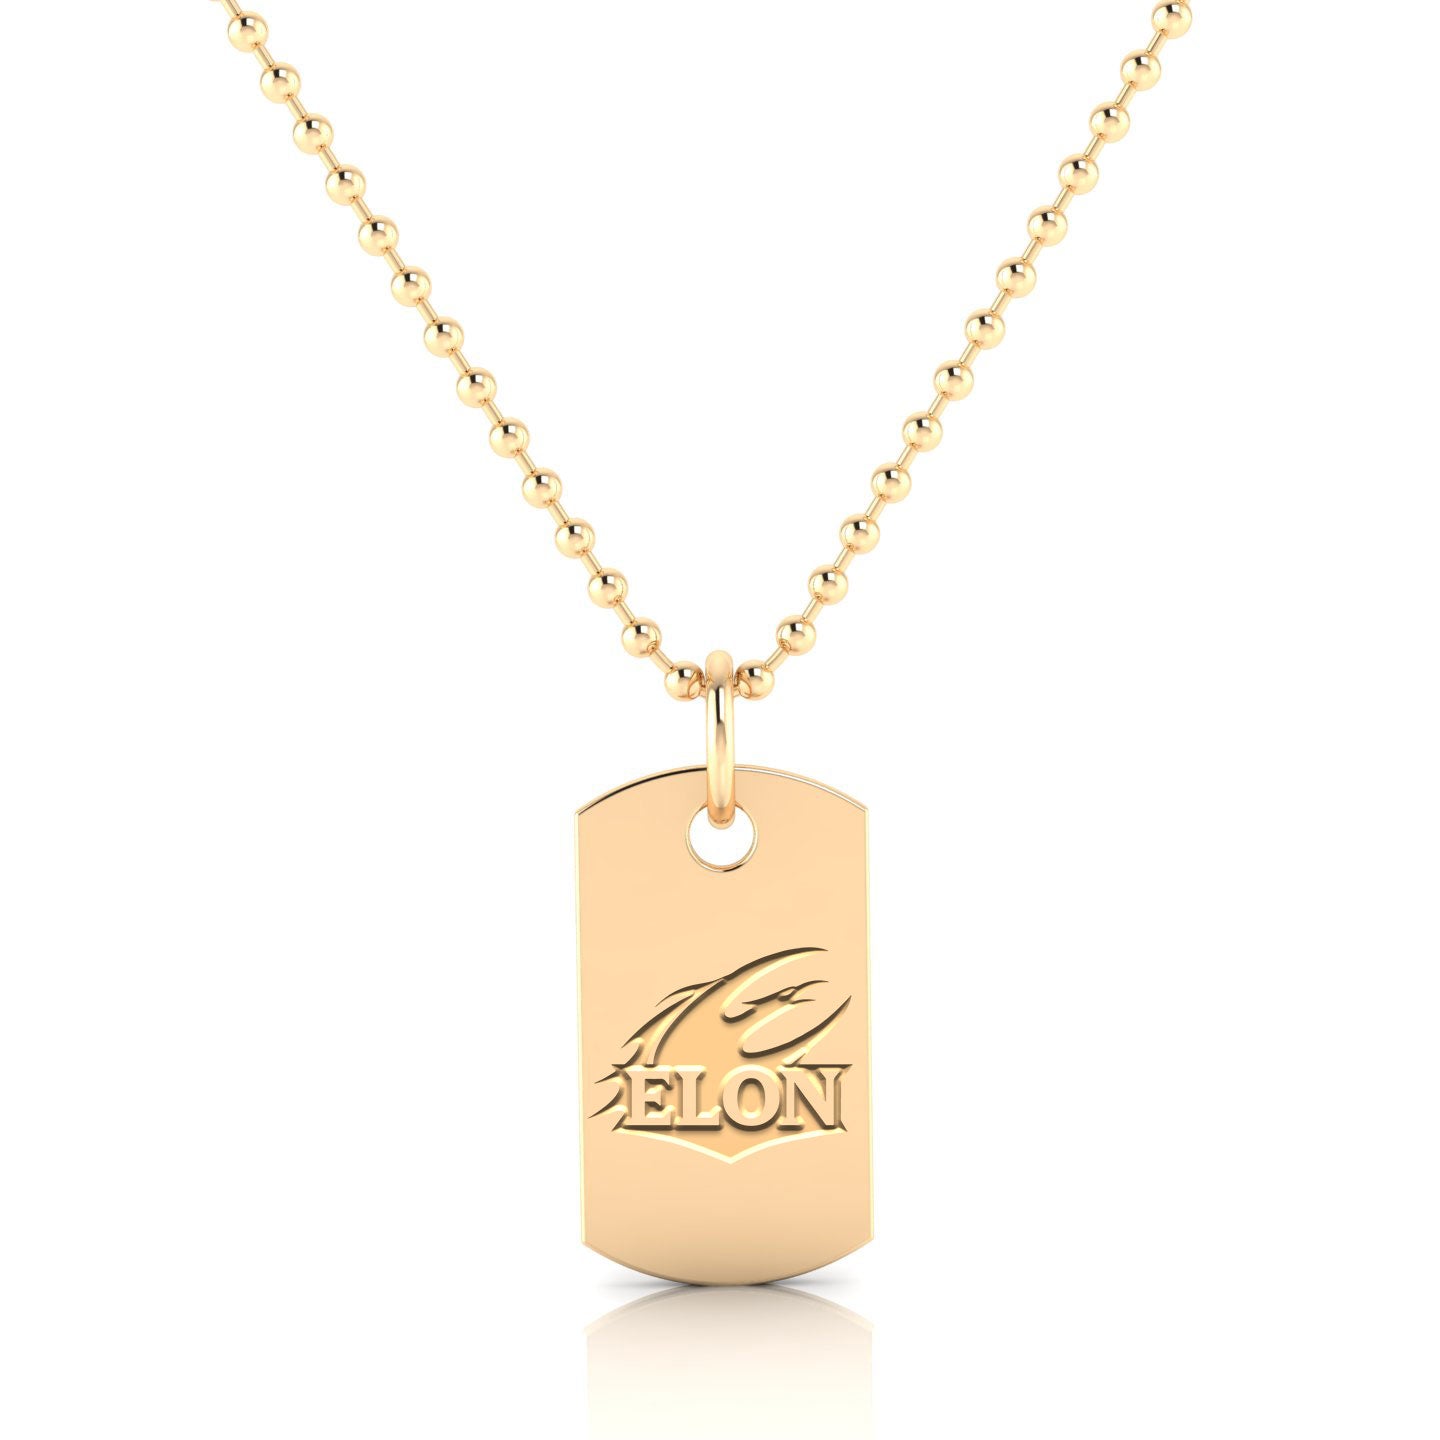 A close up view of the Elon Squadra Pendant Too in 14kt yellow gold. The logo is engraved in the center of the pendant.